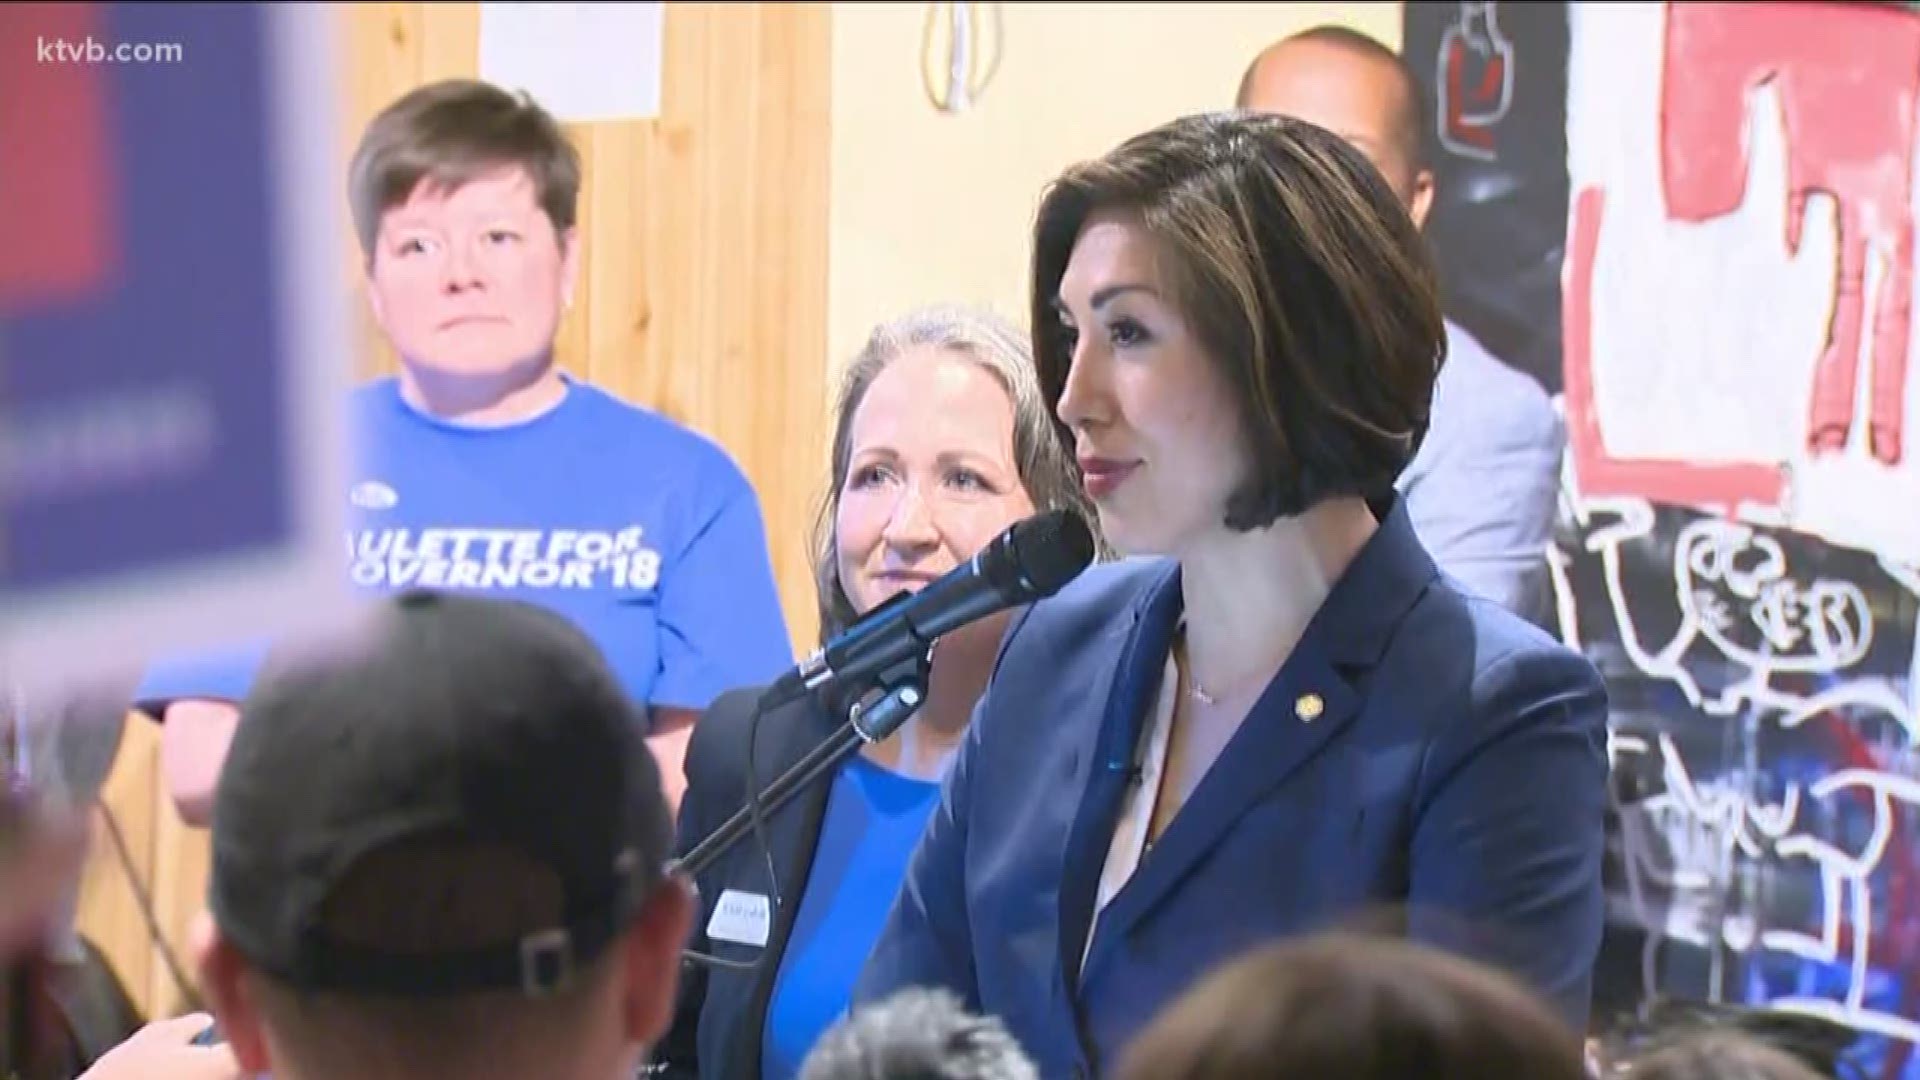 Concerns are being raised over the involvement of Idaho Democratic gubernatorial candidate Paulette Jordan's campaign with the setting up and funding of a federal super political action committee (super PAC).
